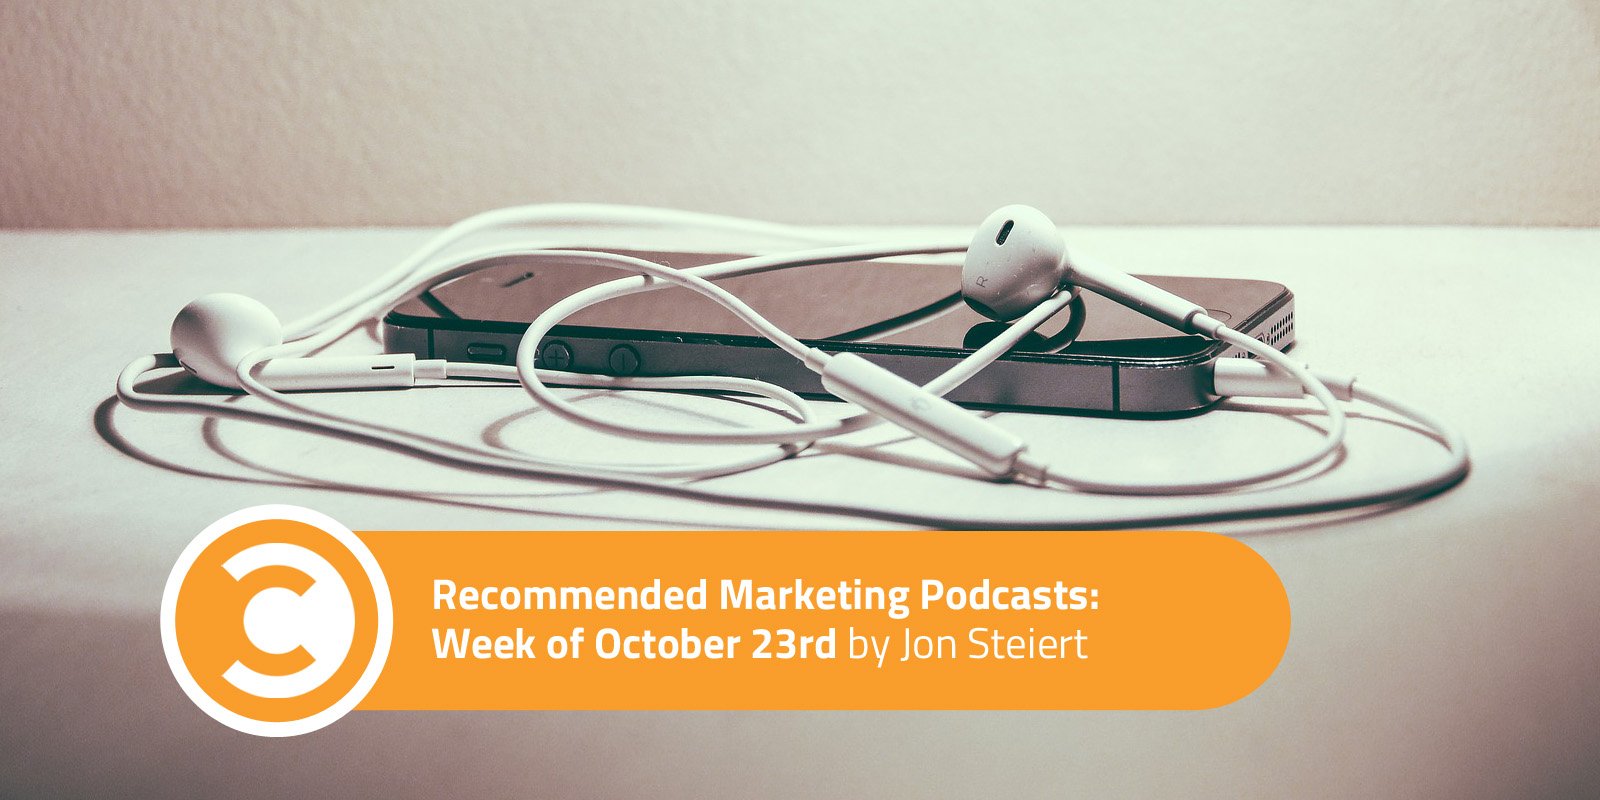 Recommended Marketing Podcasts Week of October 23rd